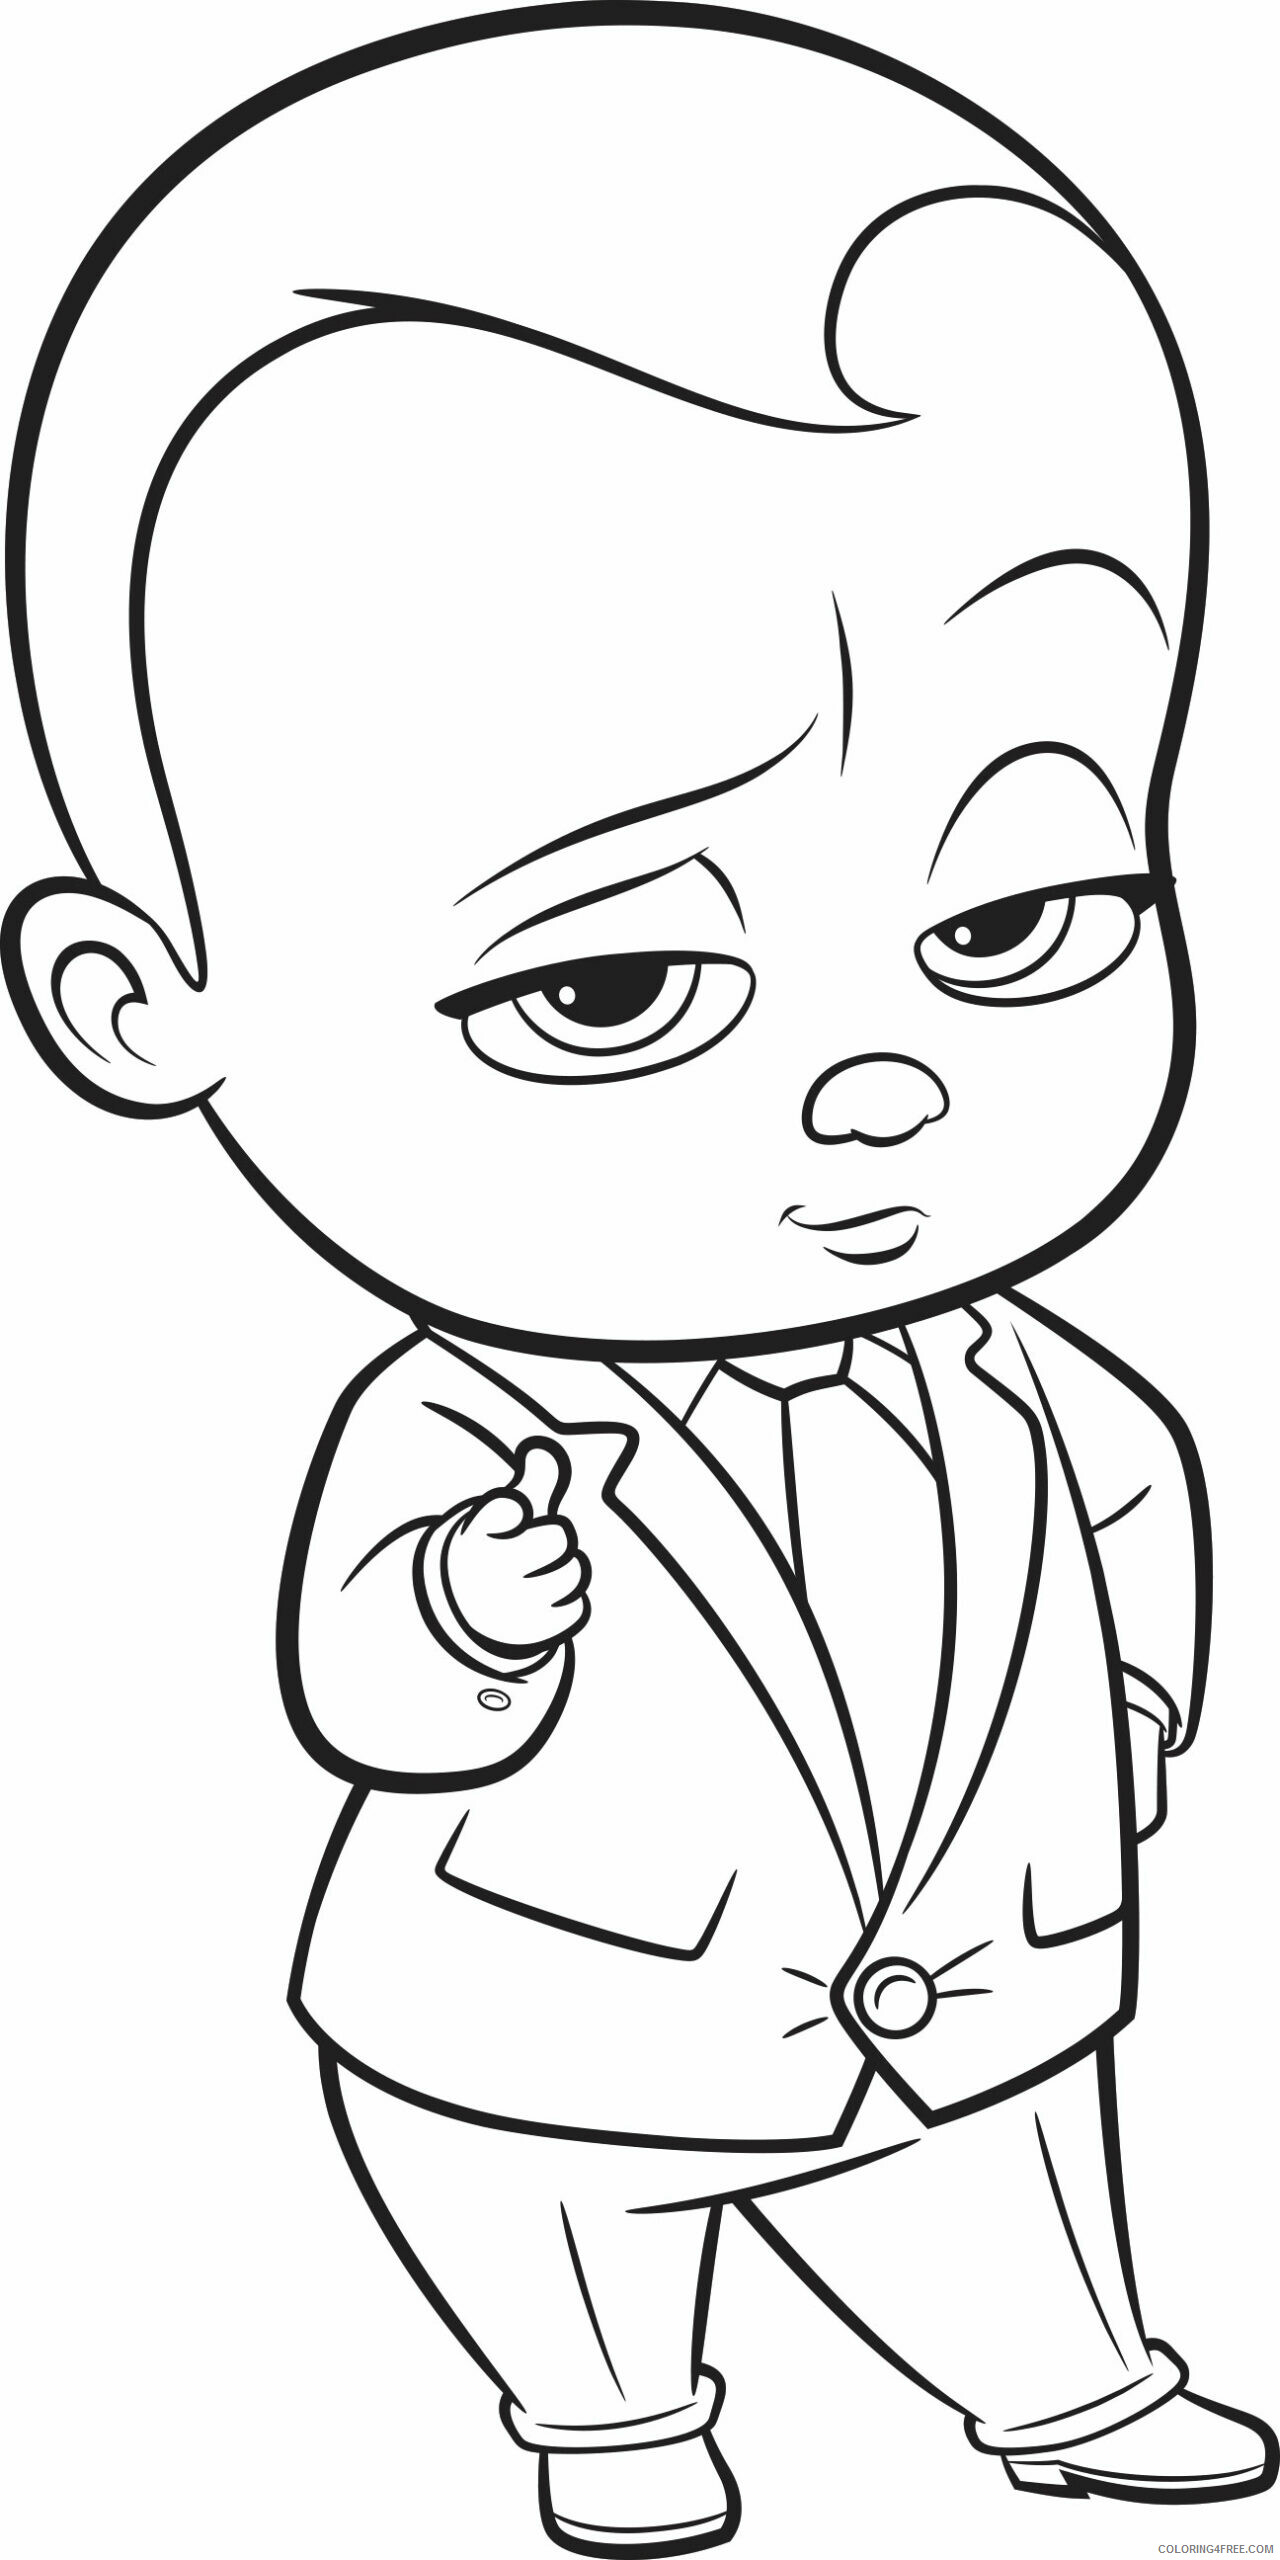 Boss Baby Coloring Pages TV Film The Boss Baby Printable 2020 01287 Coloring4free